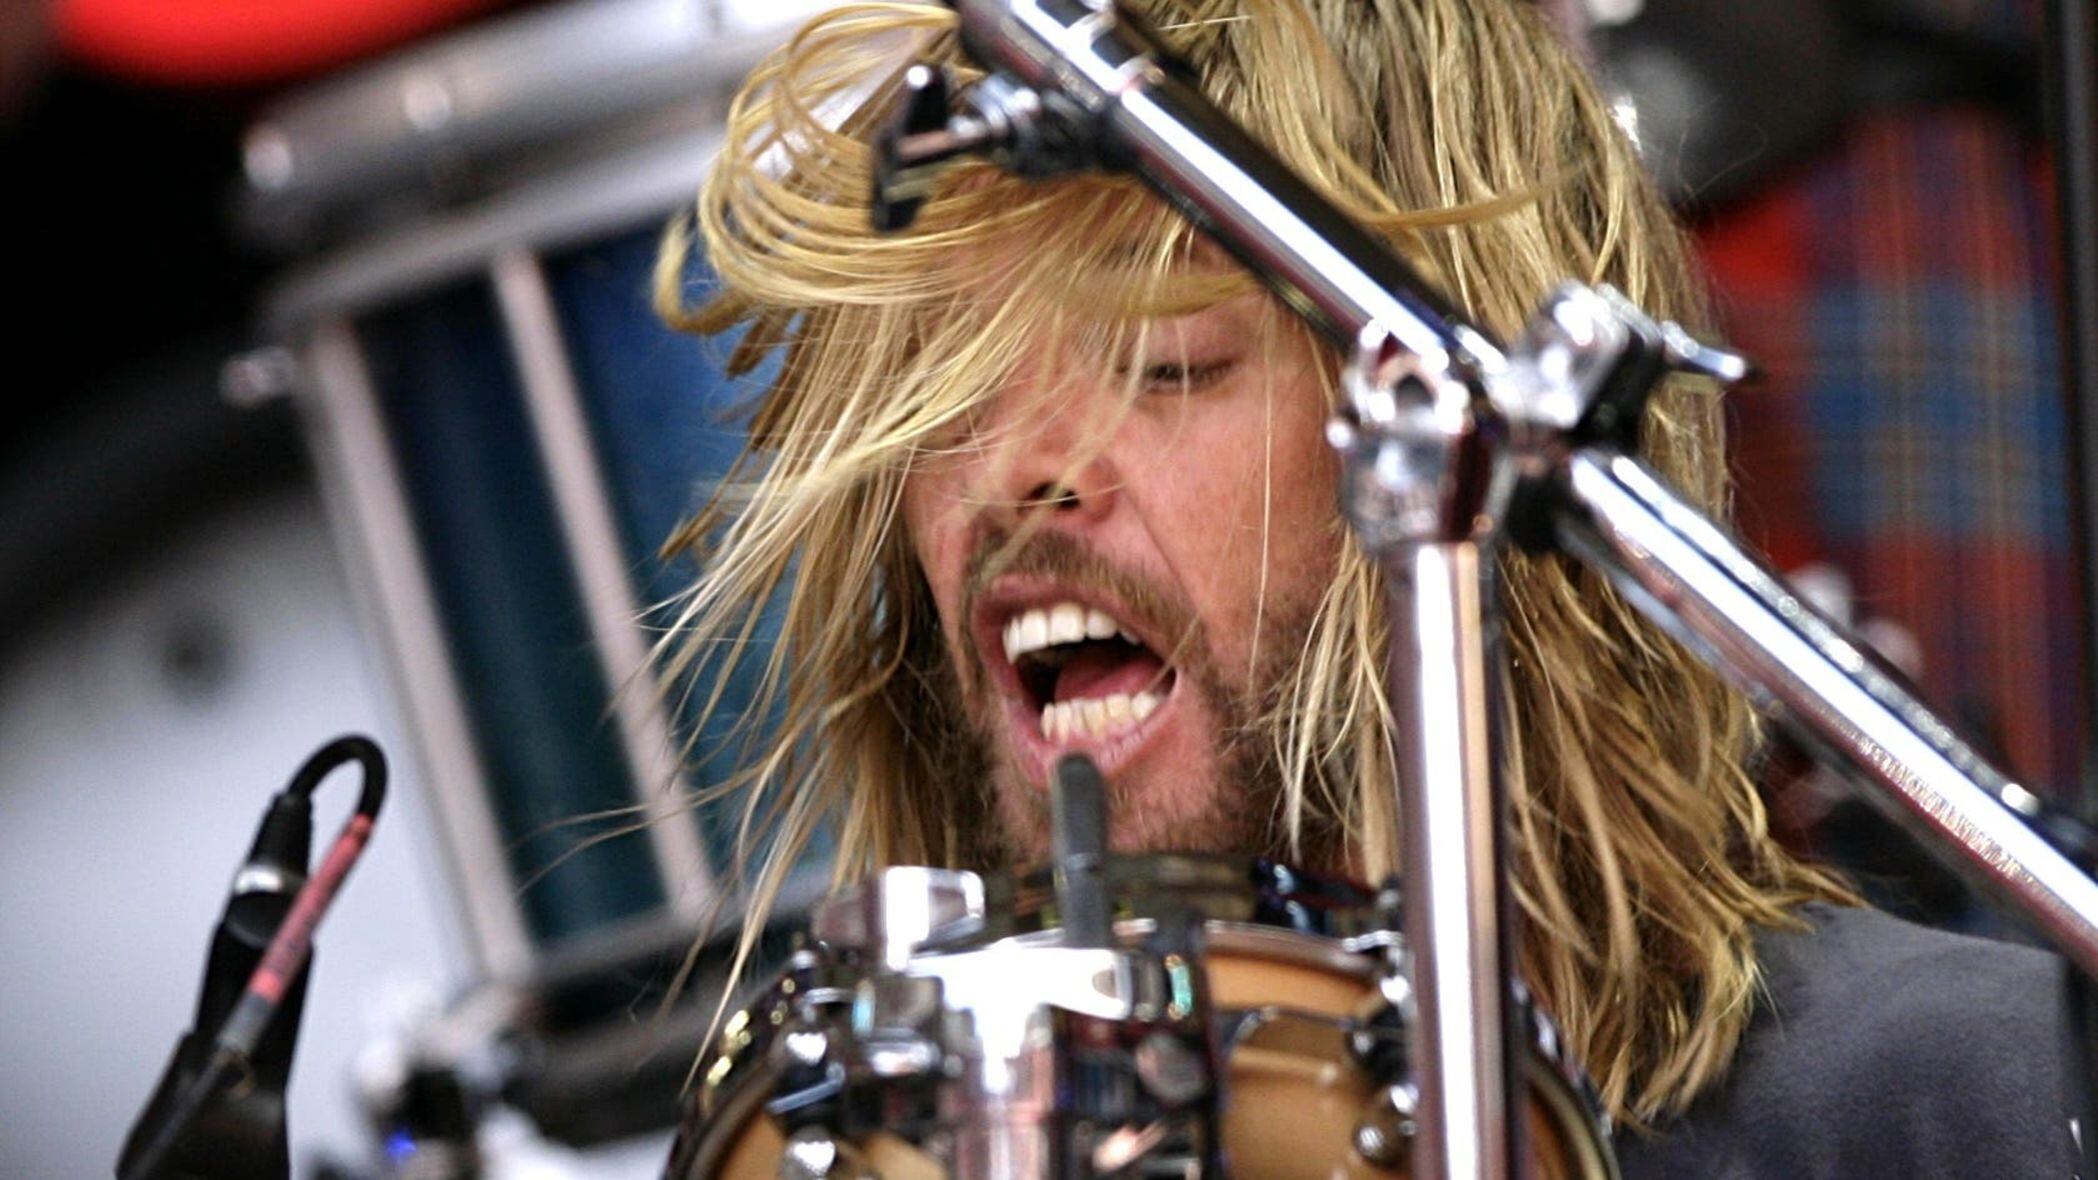 The Foo Fighters drummer was hailed as a ‘generous and cool person’ as well as being an ‘amazing musician’ following his death aged 50.